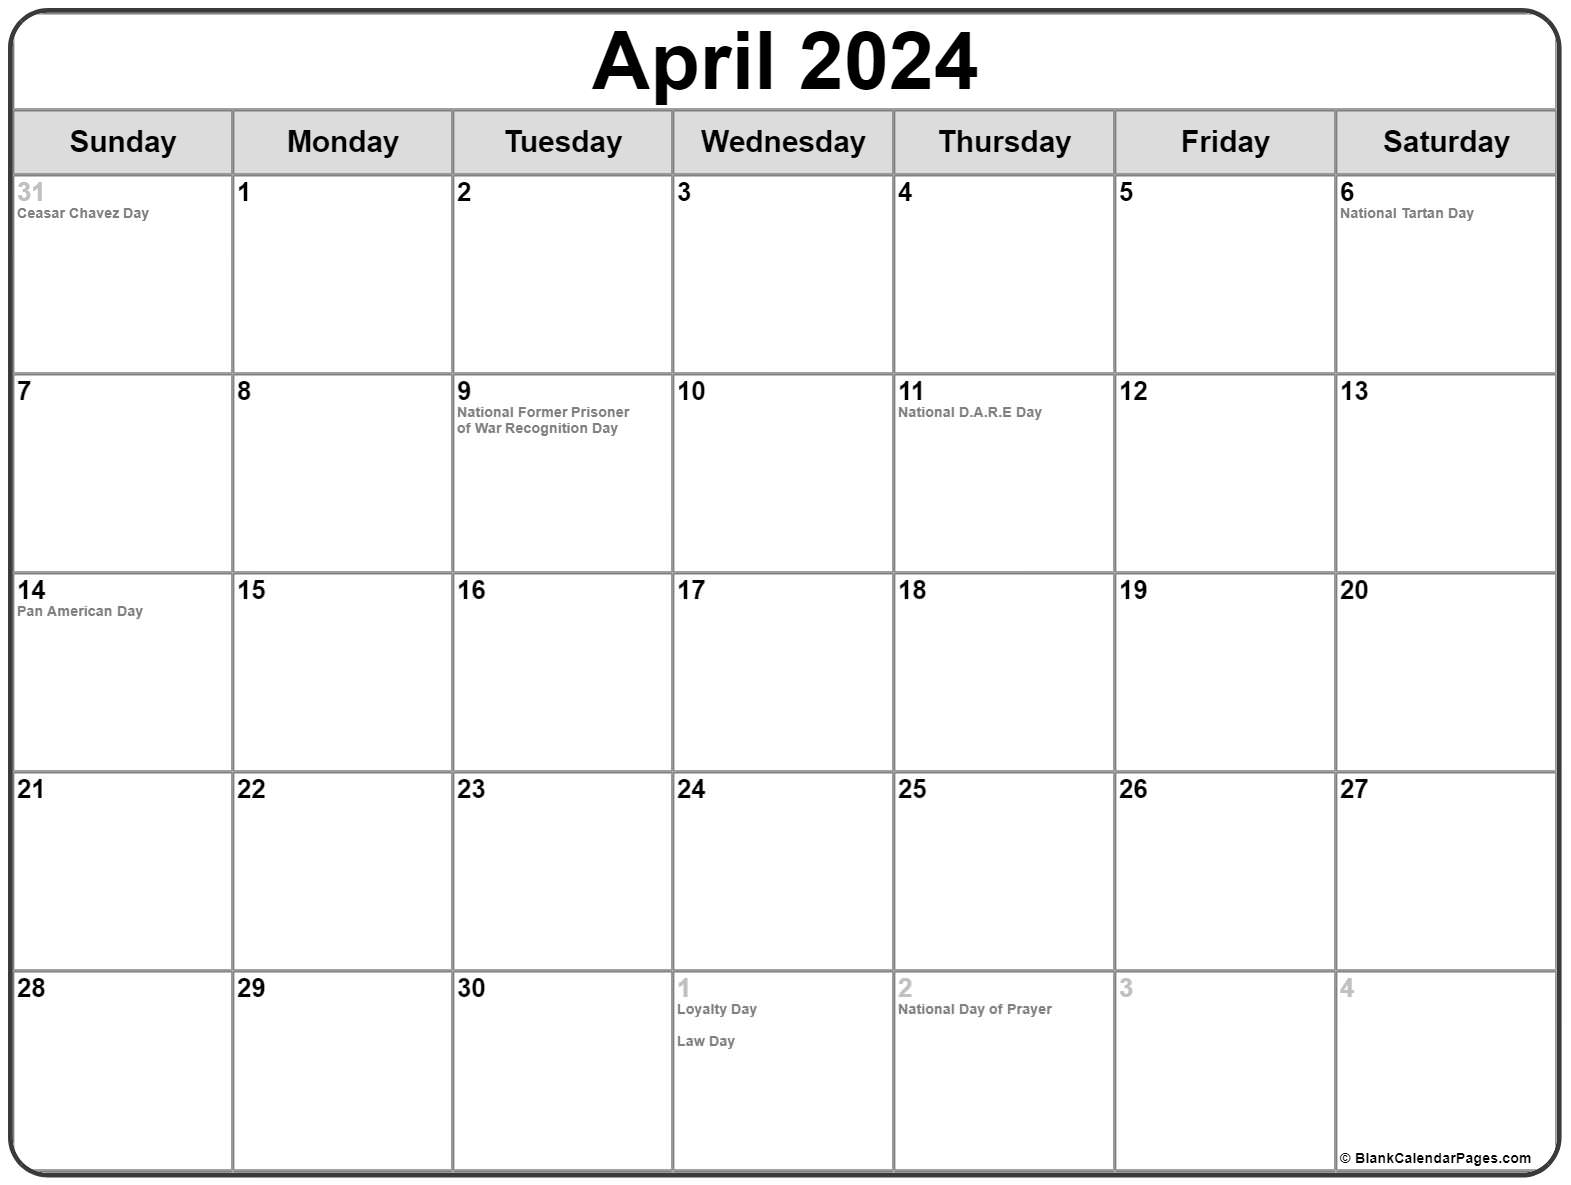 April 2024 With Holidays Calendar intended for National Day Calendar April 2024